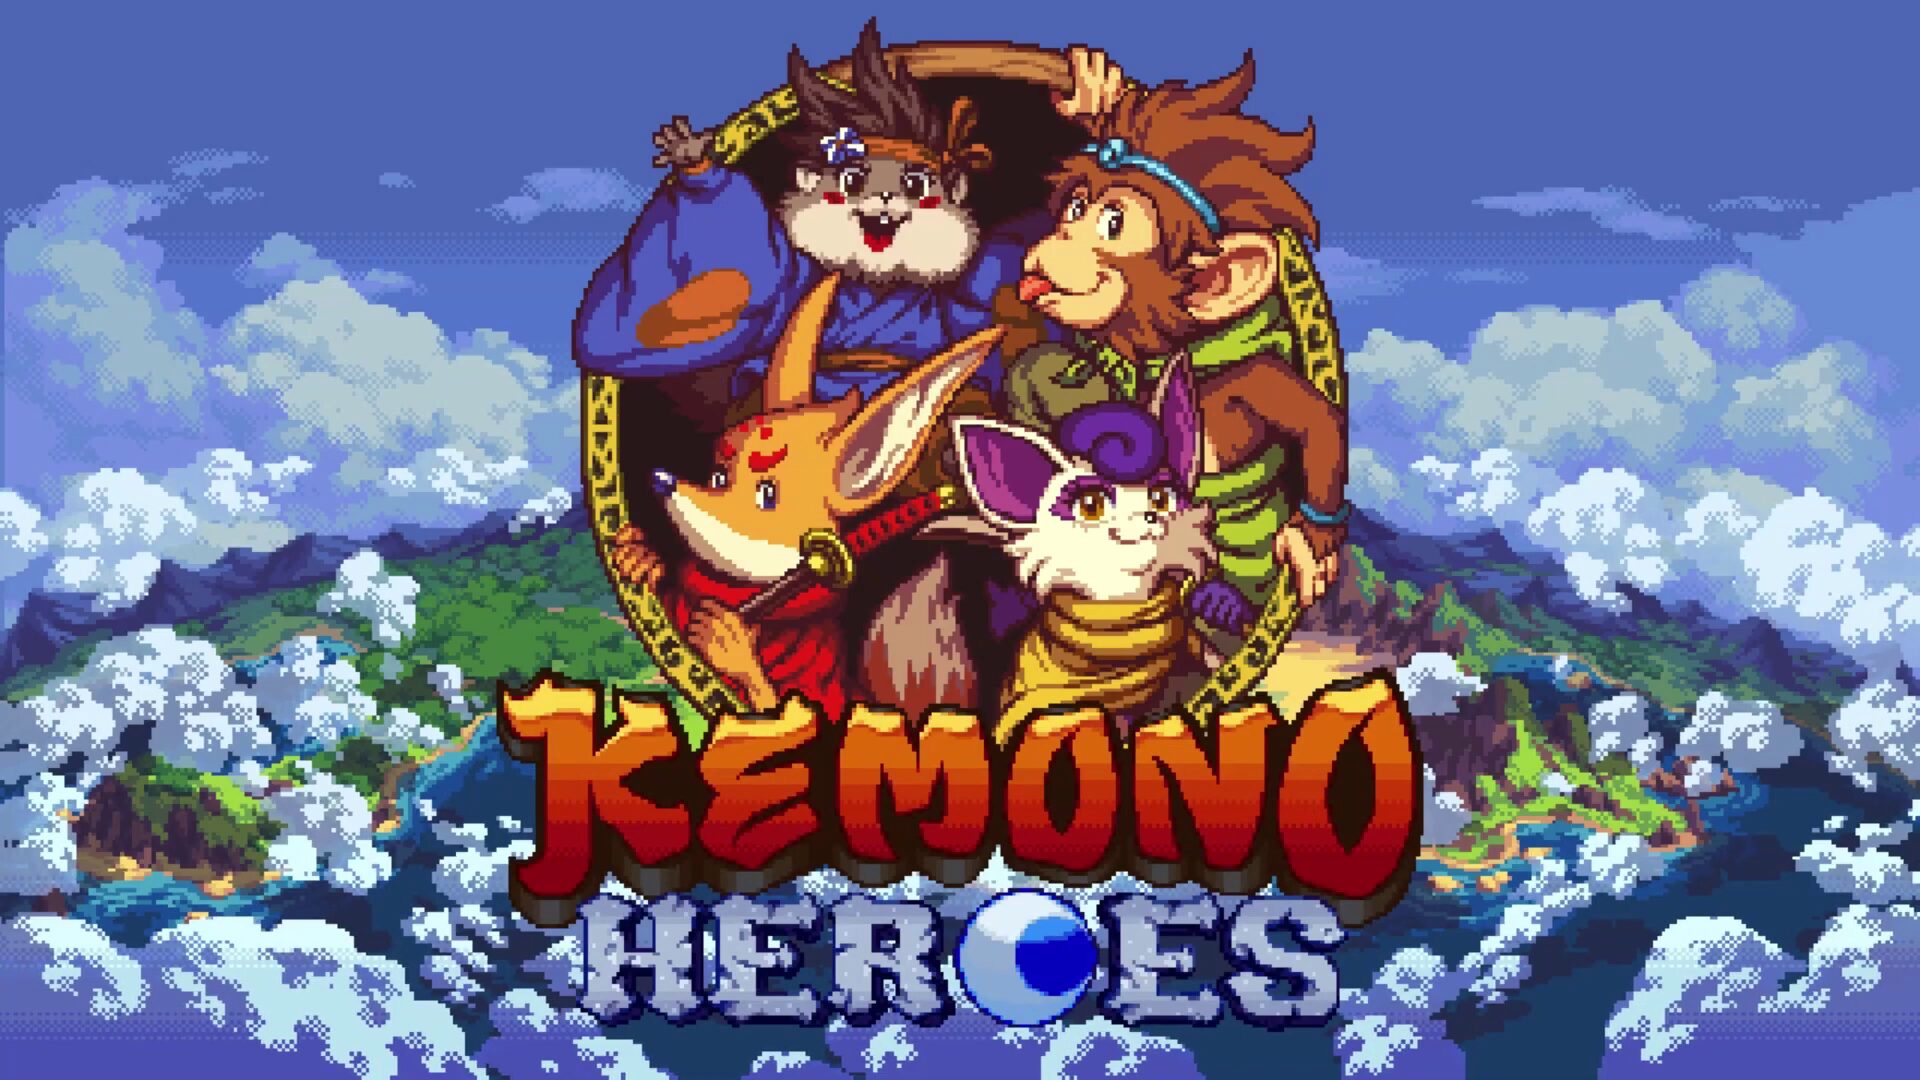 Kemono Heroes coming to PS5, Xbox Series, PS4, Xbox One, and PC in Q3